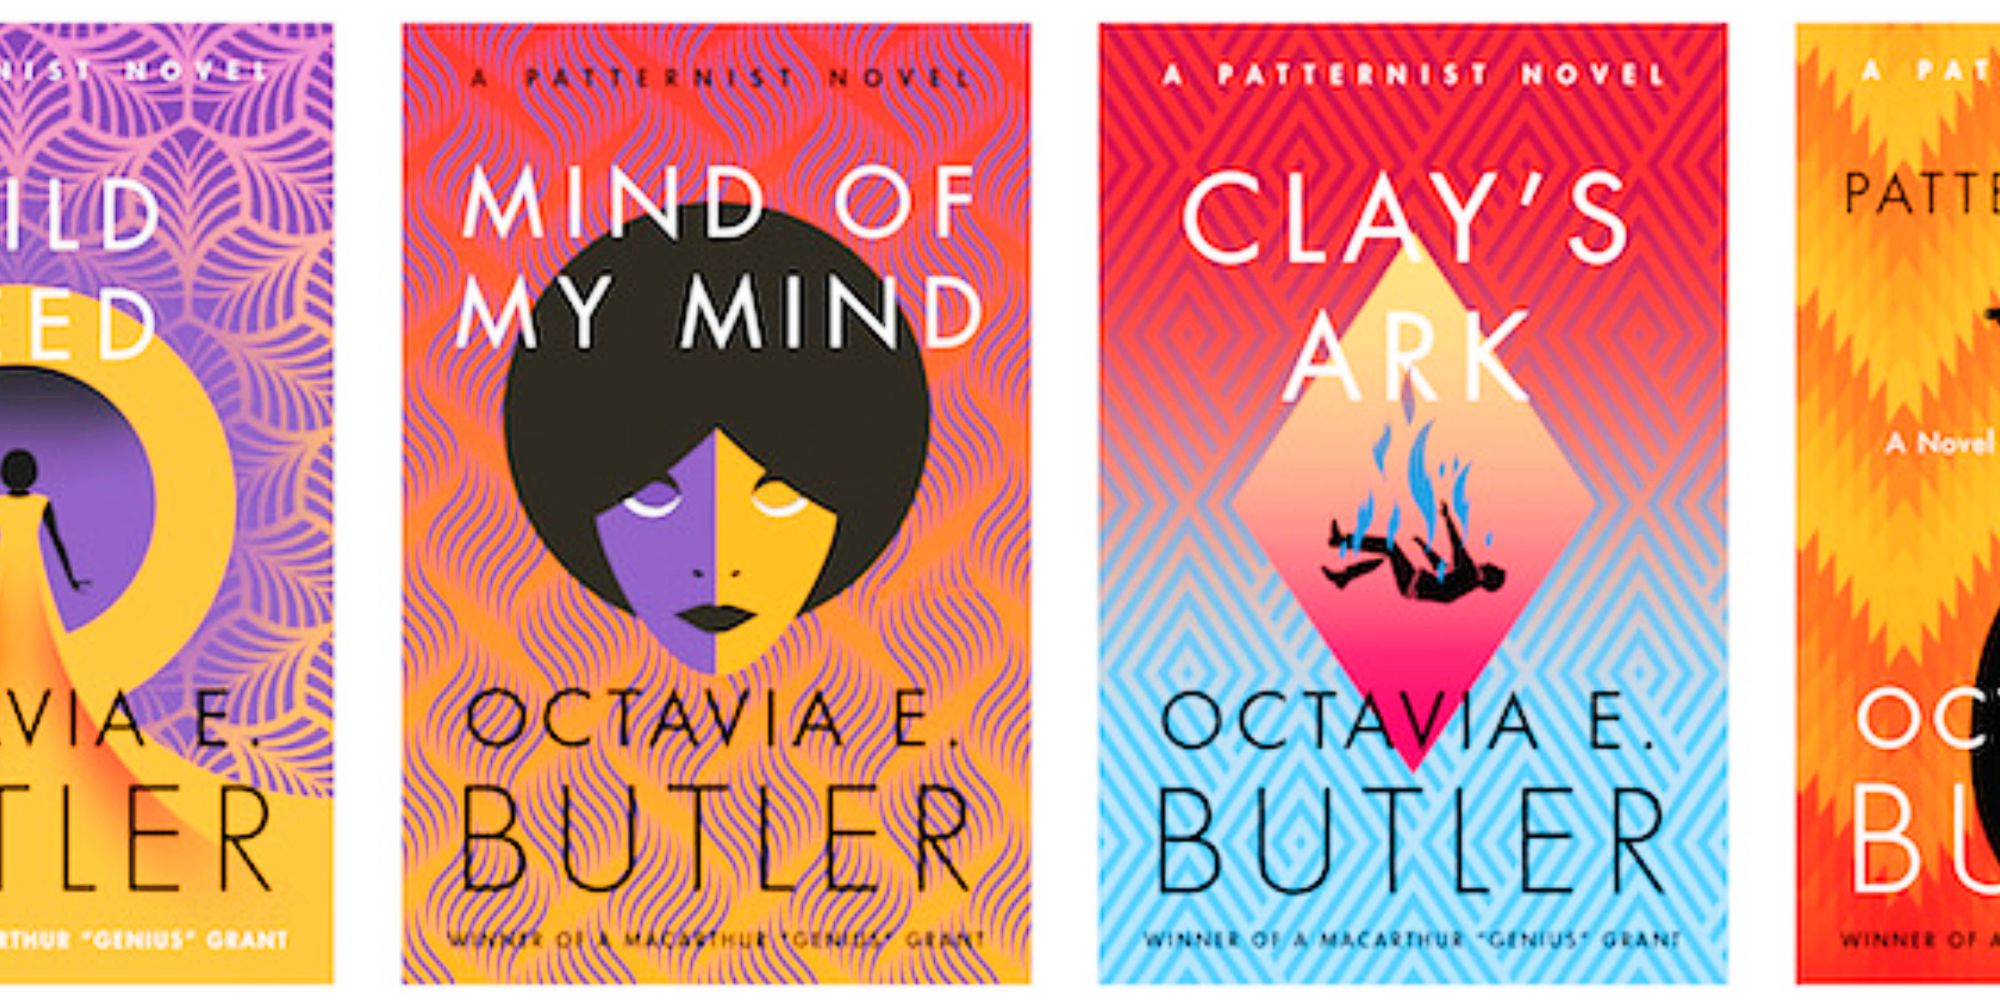 The Patternmaster Series by Octavia Butler